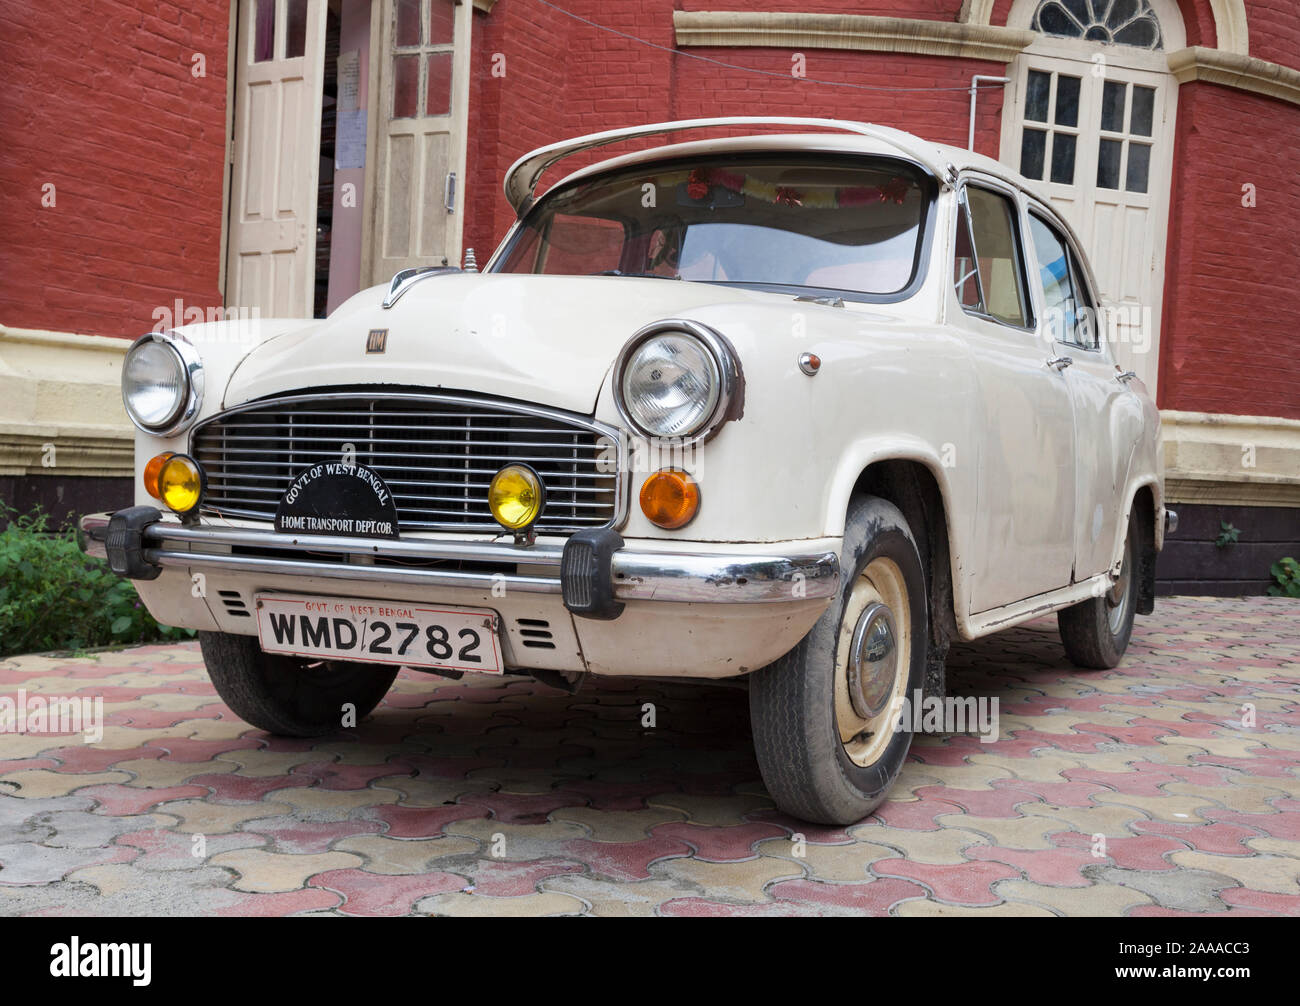 The classic Ambassador motor car still in government service in Cooch Behar district of West Bengal, India Stock Photo